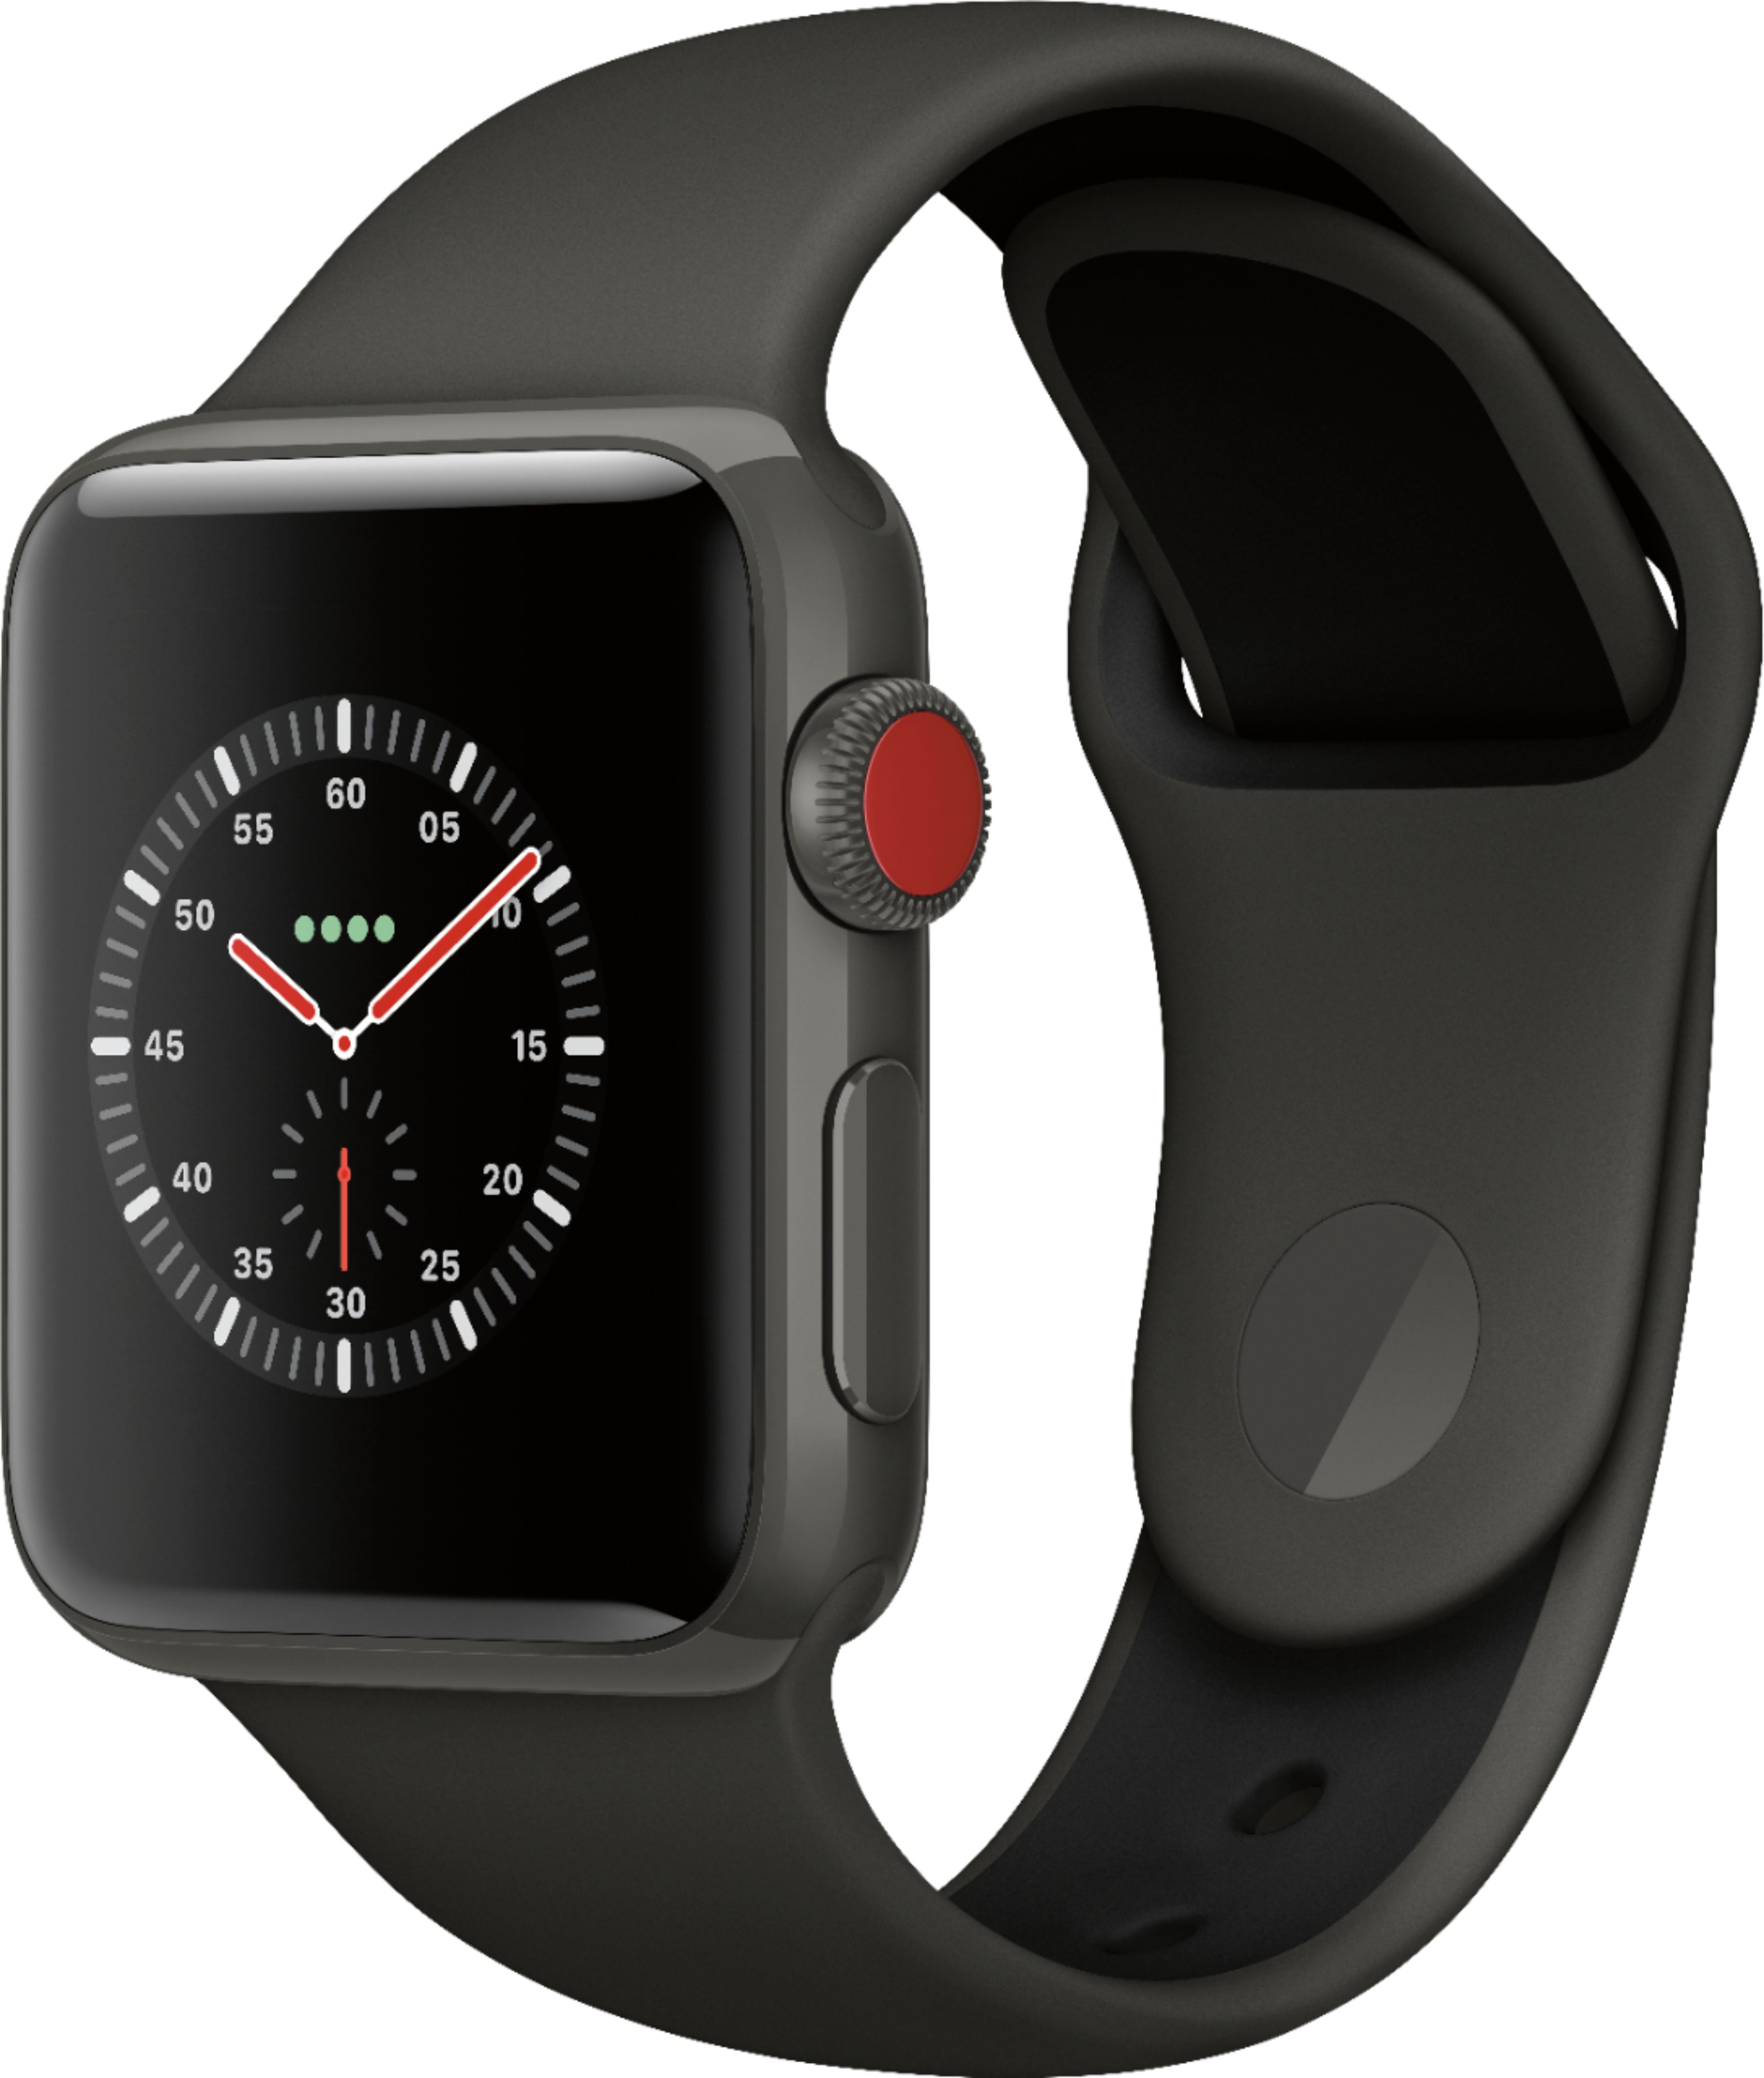 Angle View: Geek Squad Certified Refurbished Apple Watch Edition (GPS + Cellular) 38mm with Gray/Black Sport Band - Gray Ceramic